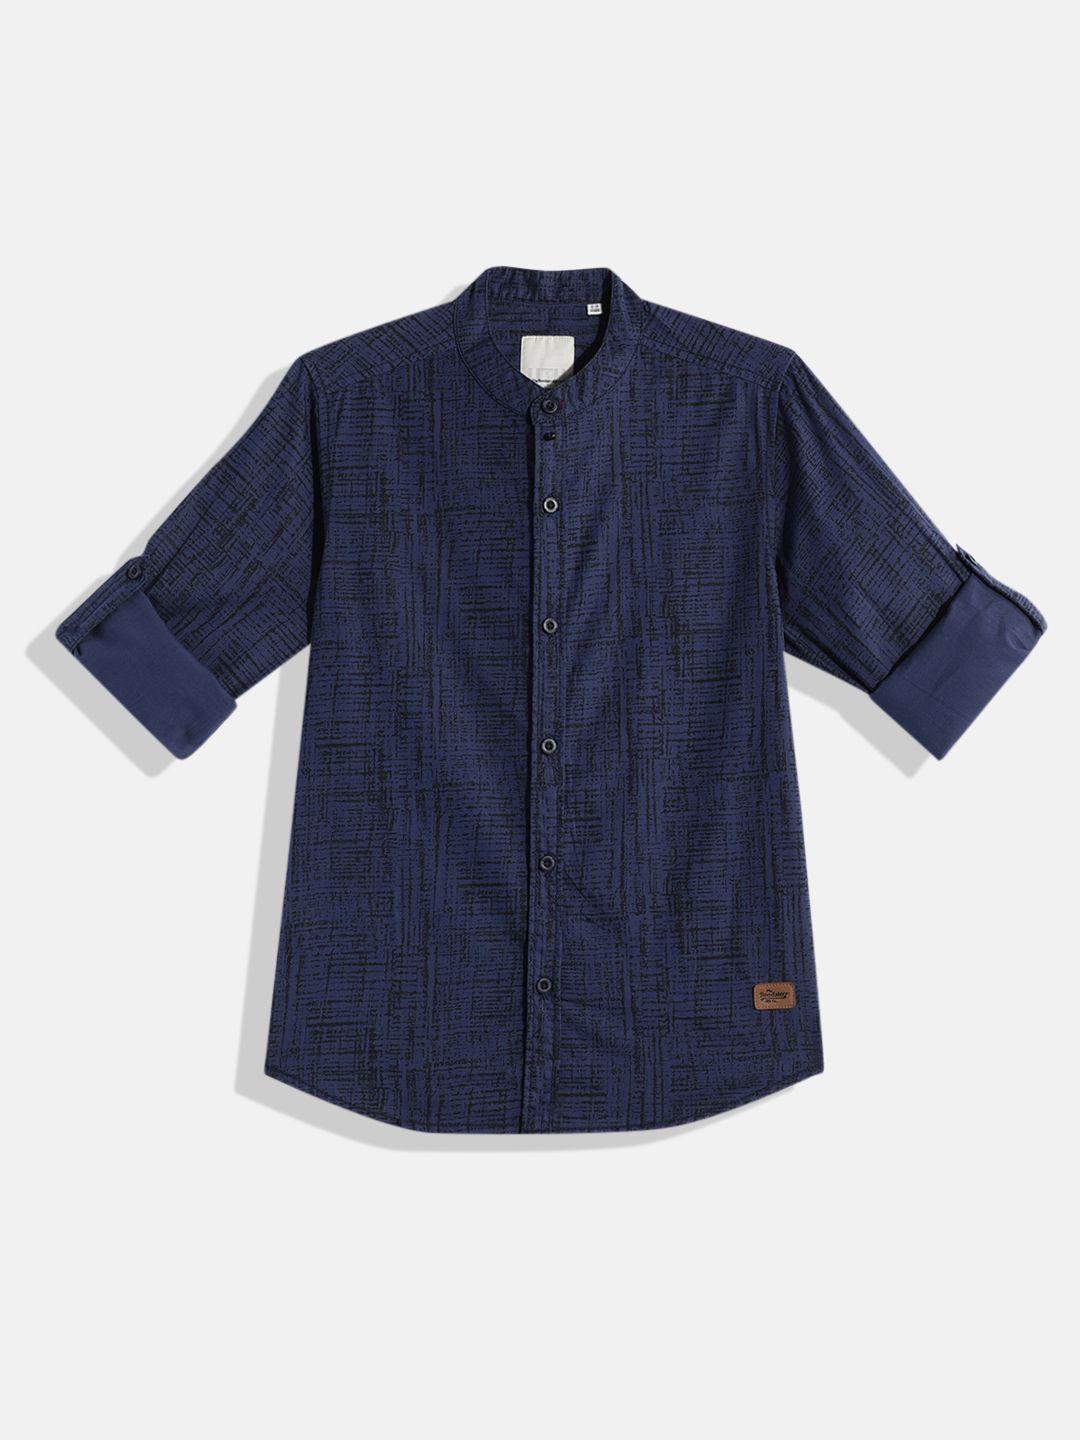 uth by roadster boys navy blue & black abstract printed pure cotton casual shirt